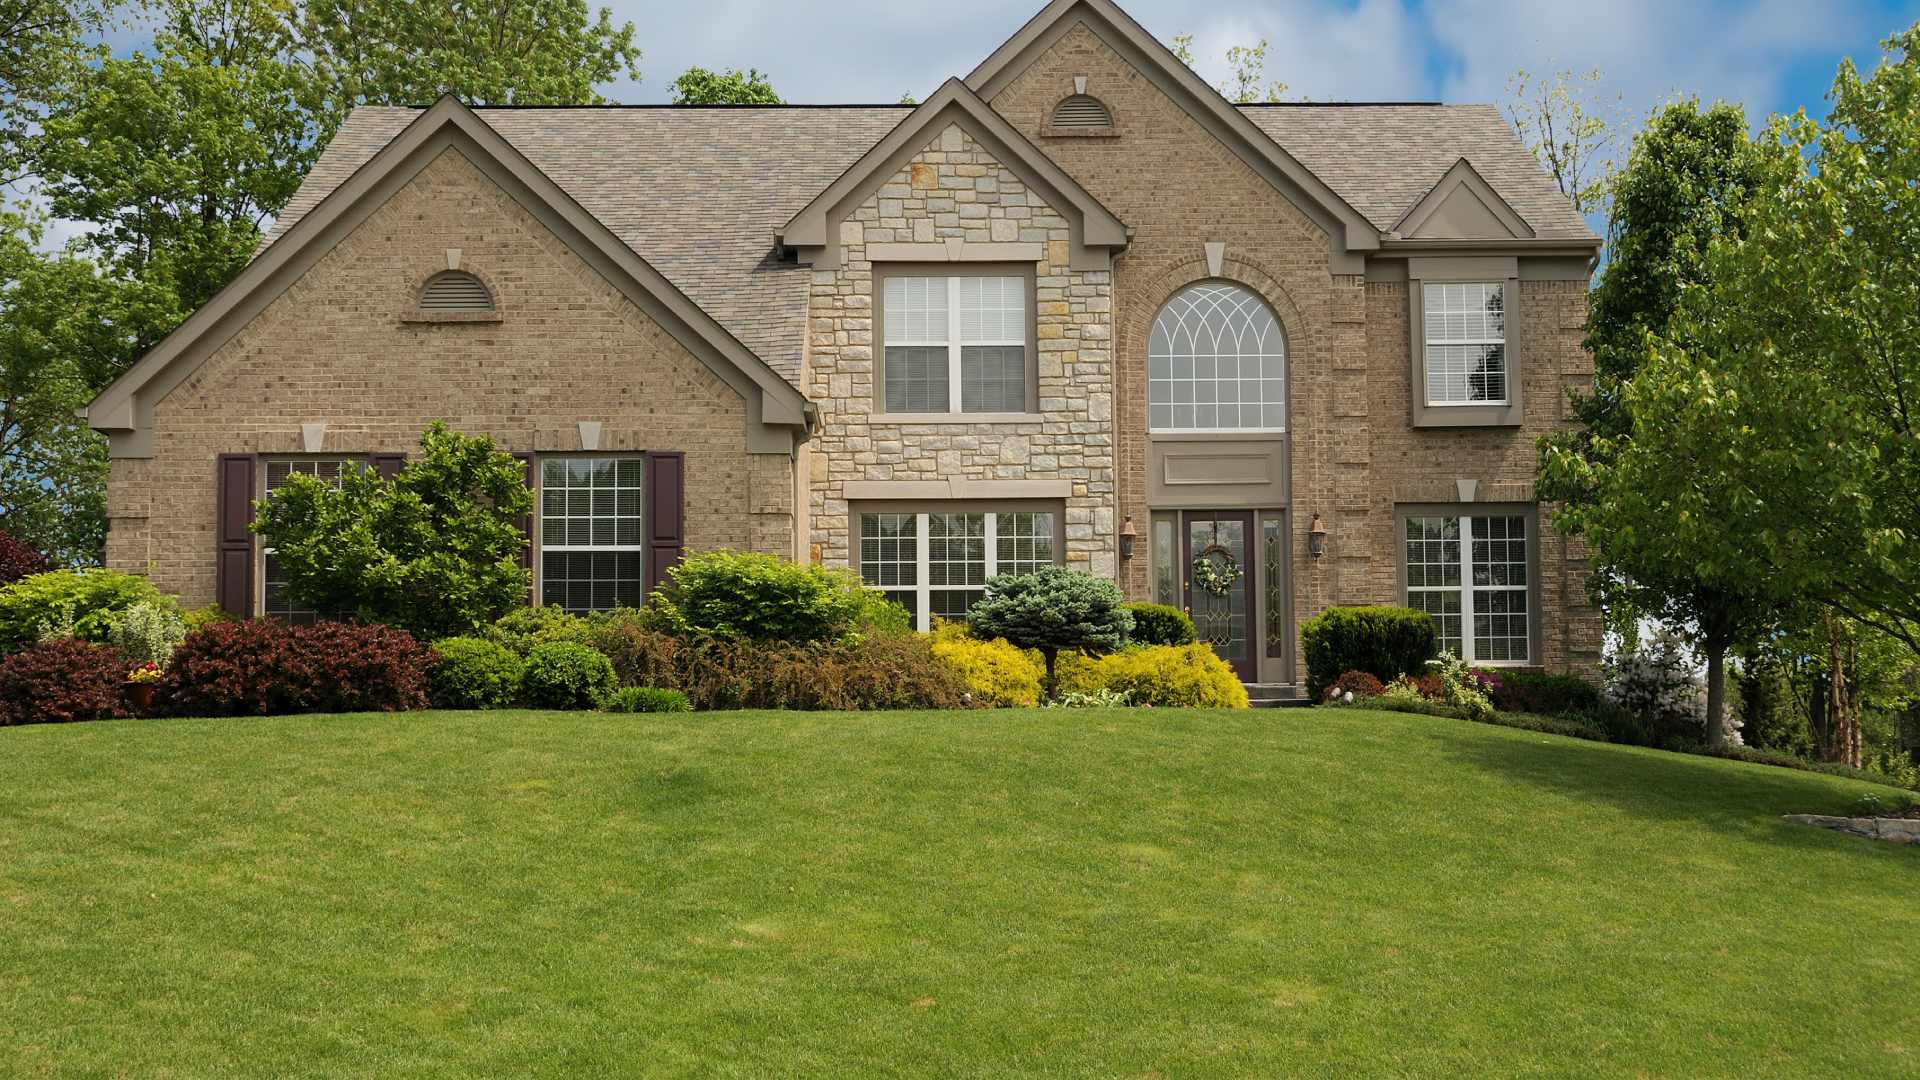 Large home with a maintained lawn and landscape bed in New Palestine, IN.